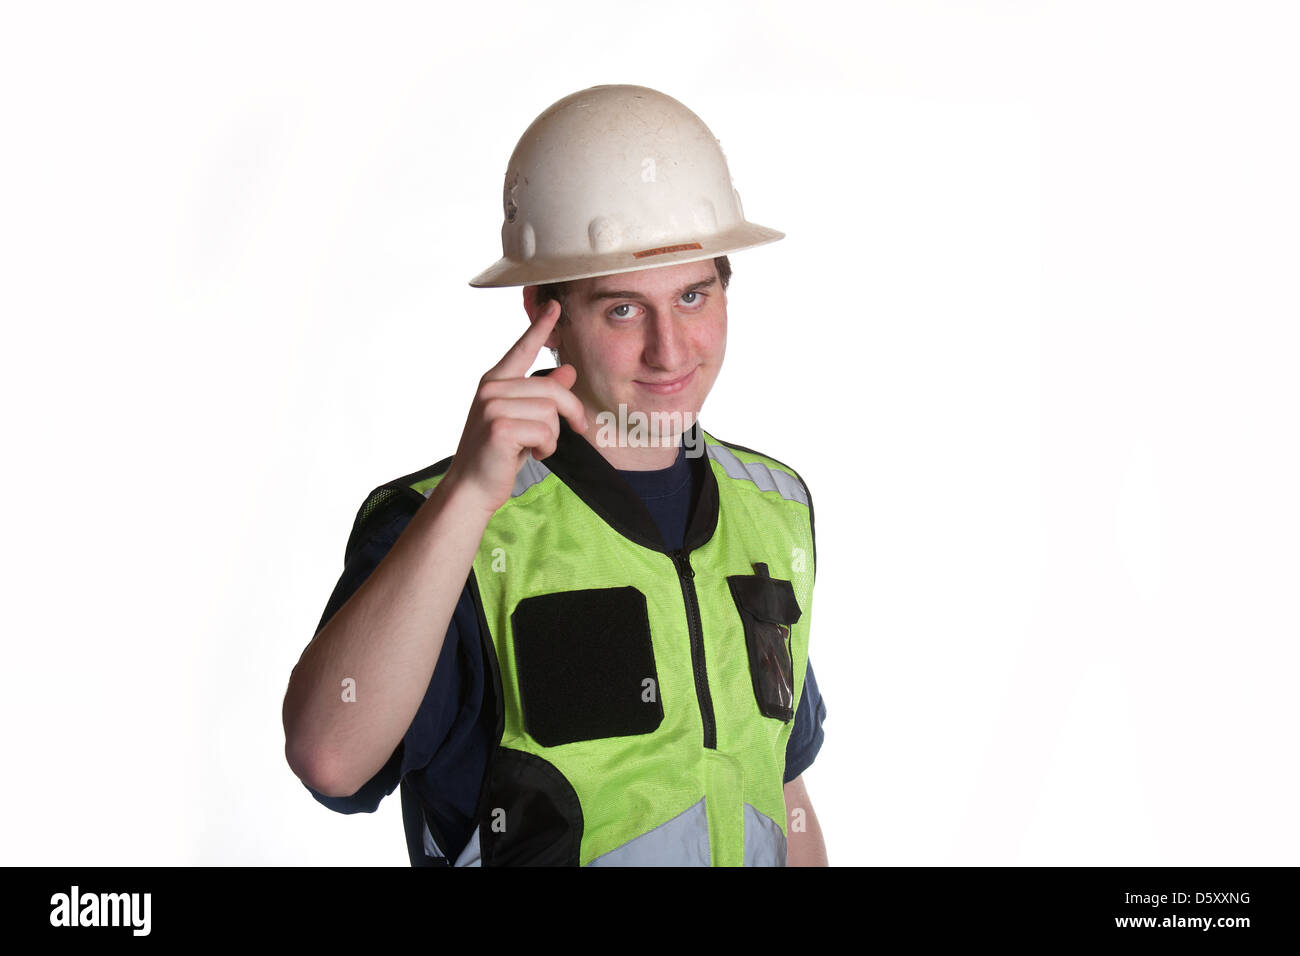 Construction Worker in safety jacket Stock Photo